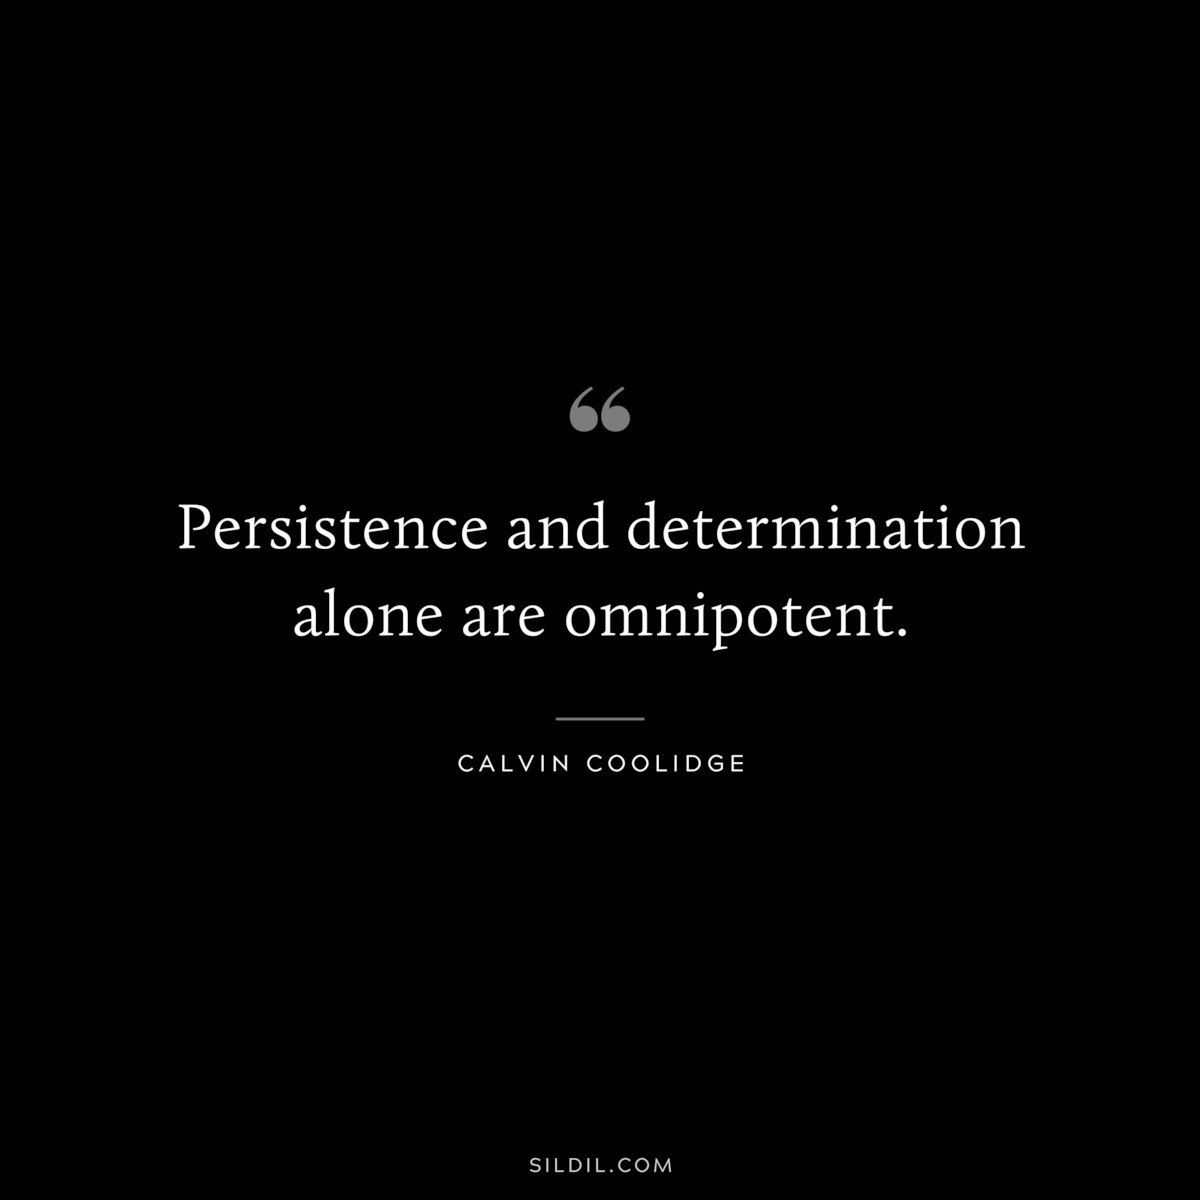 Persistence and determination alone are omnipotent. ― Calvin Coolidge